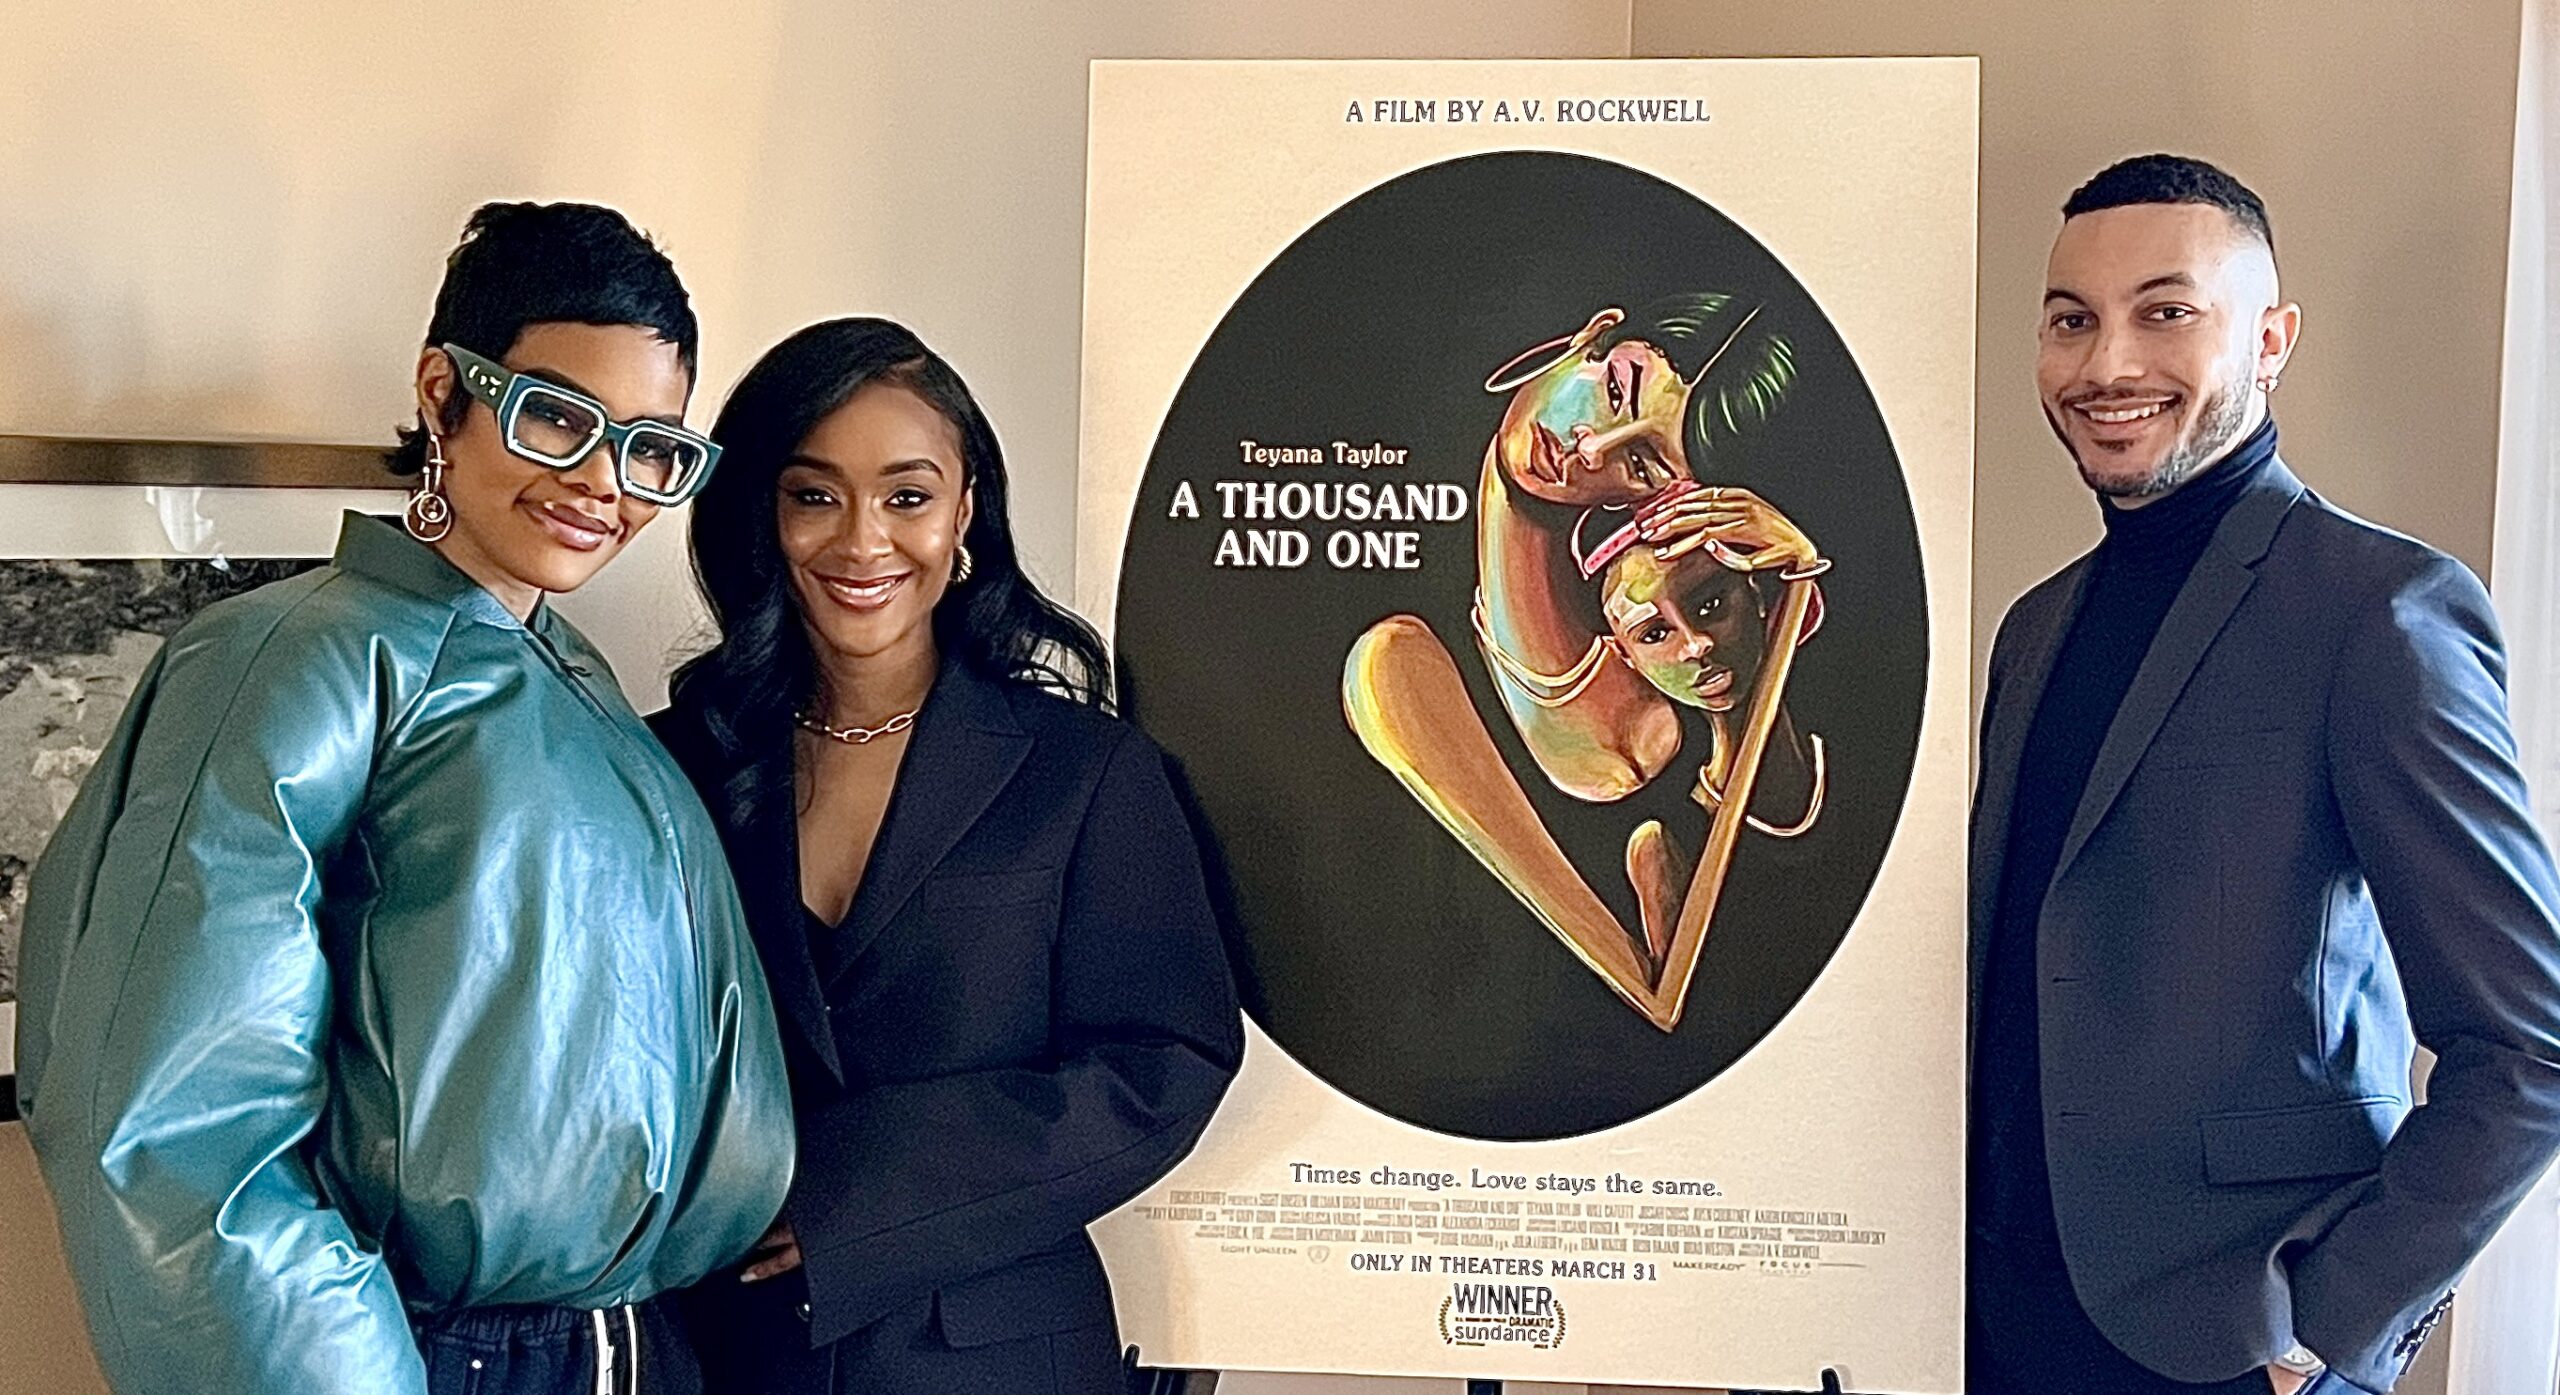 Exclusive: Teyana Taylor & A.V. Rockwell Talk Powerful New Movie ‘A Thousand and One’